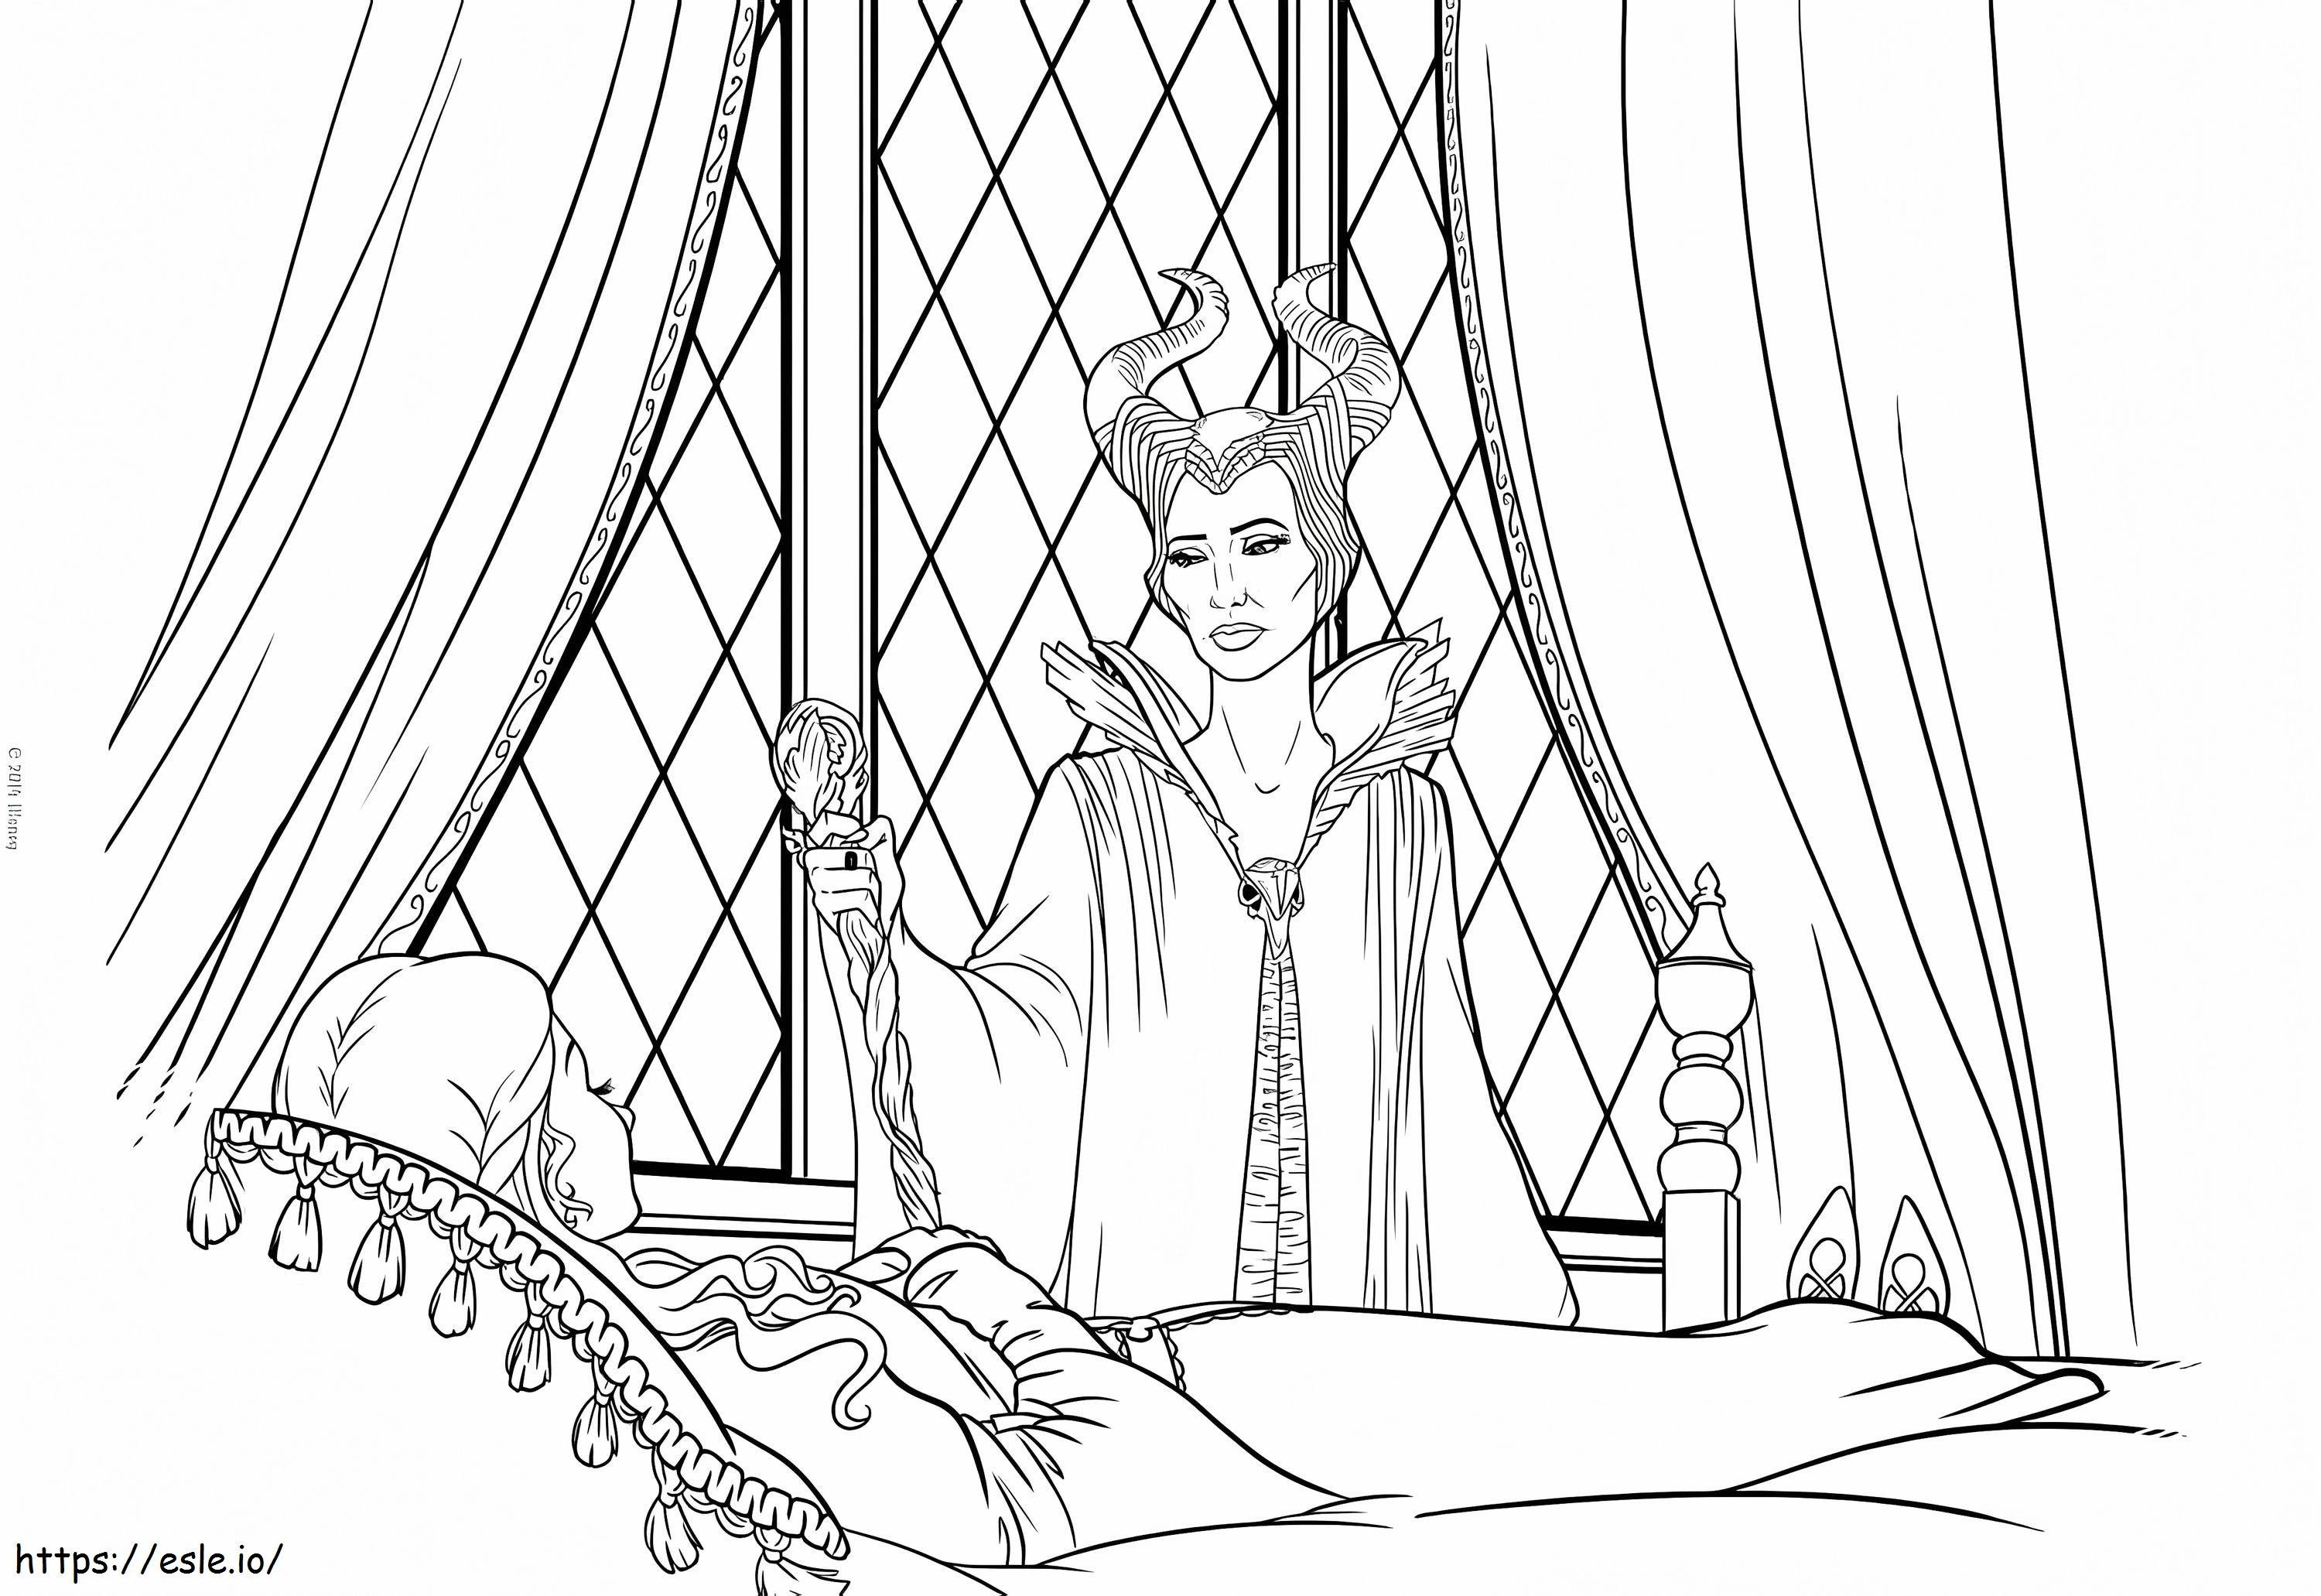 Maleficent Apologizes To Aurora coloring page